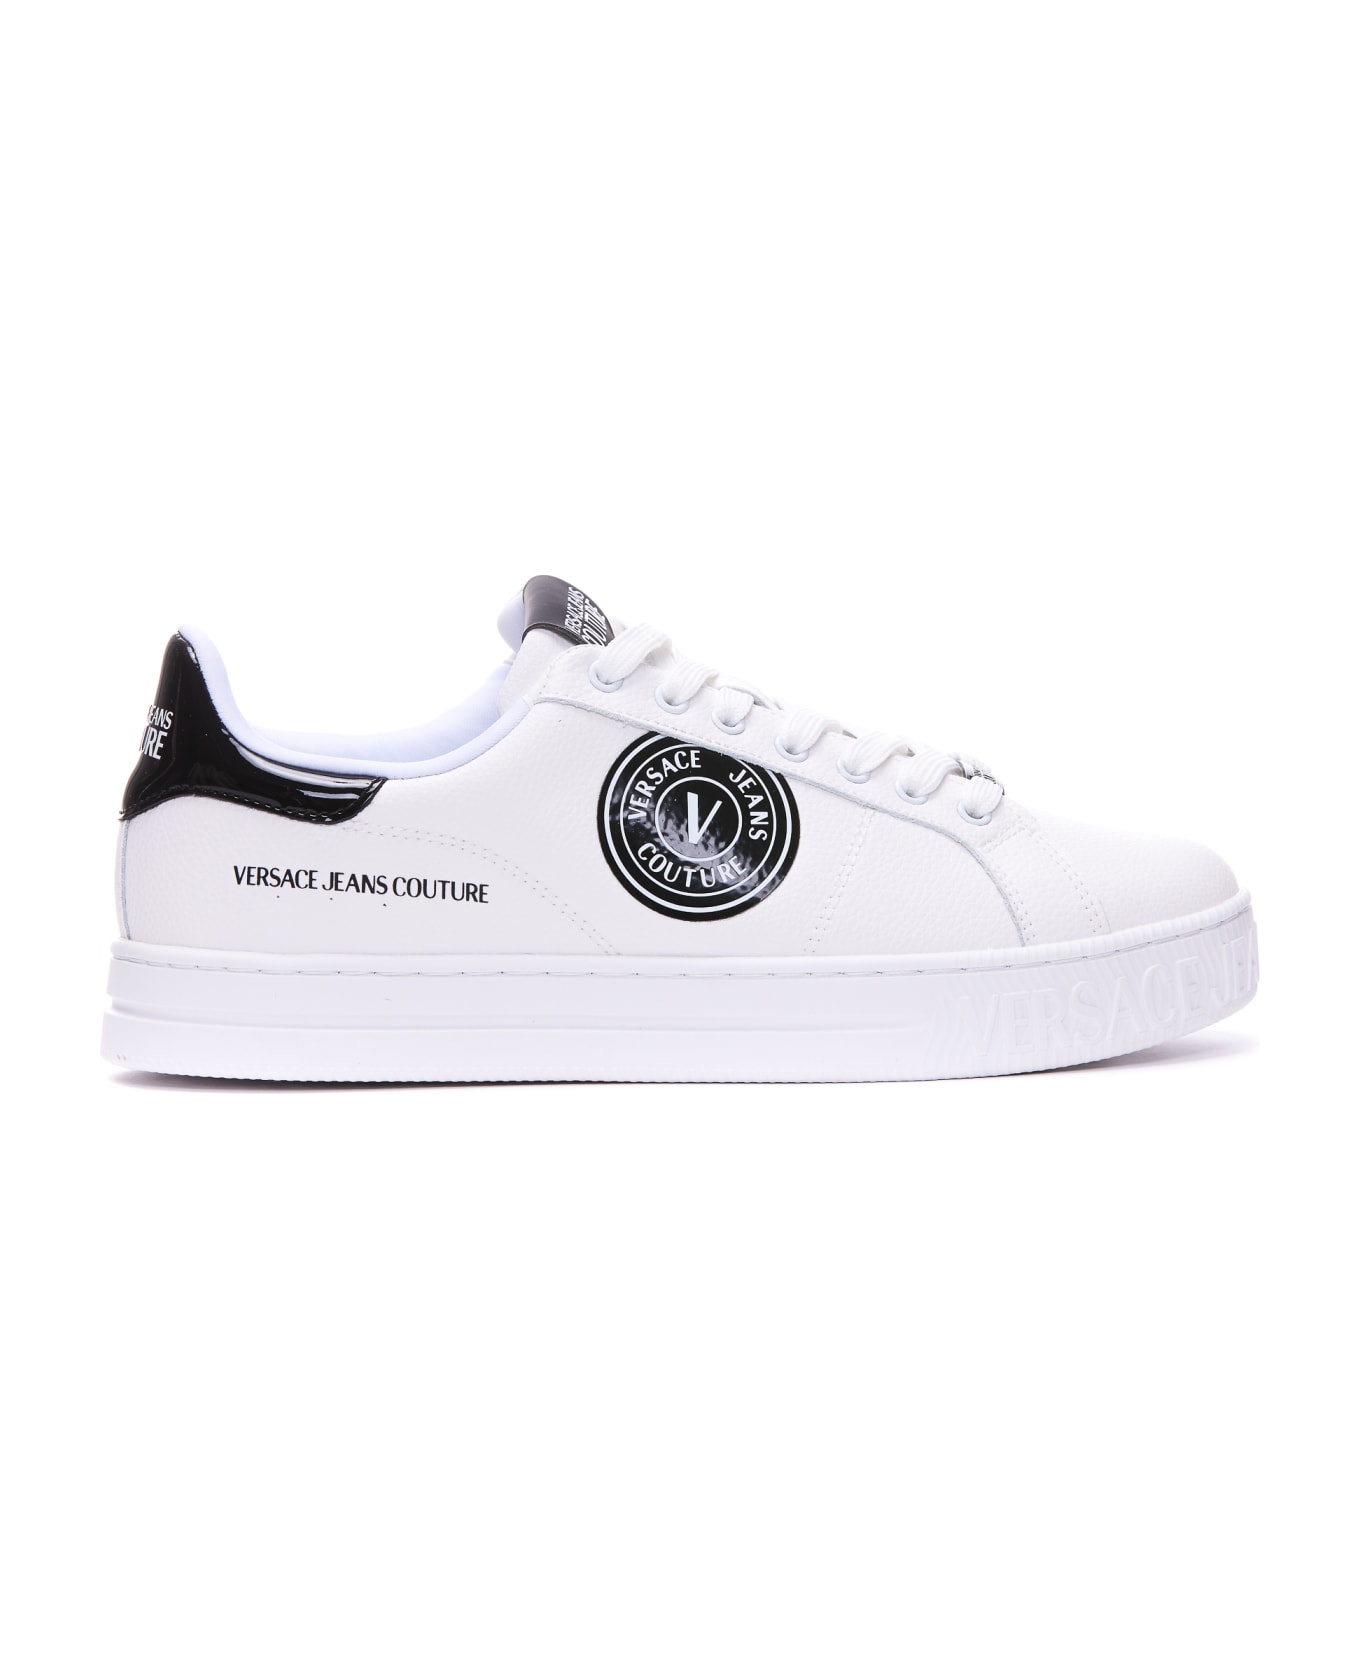 Versace Jeans Couture Sneaker With Logo - WHITE/BLACK